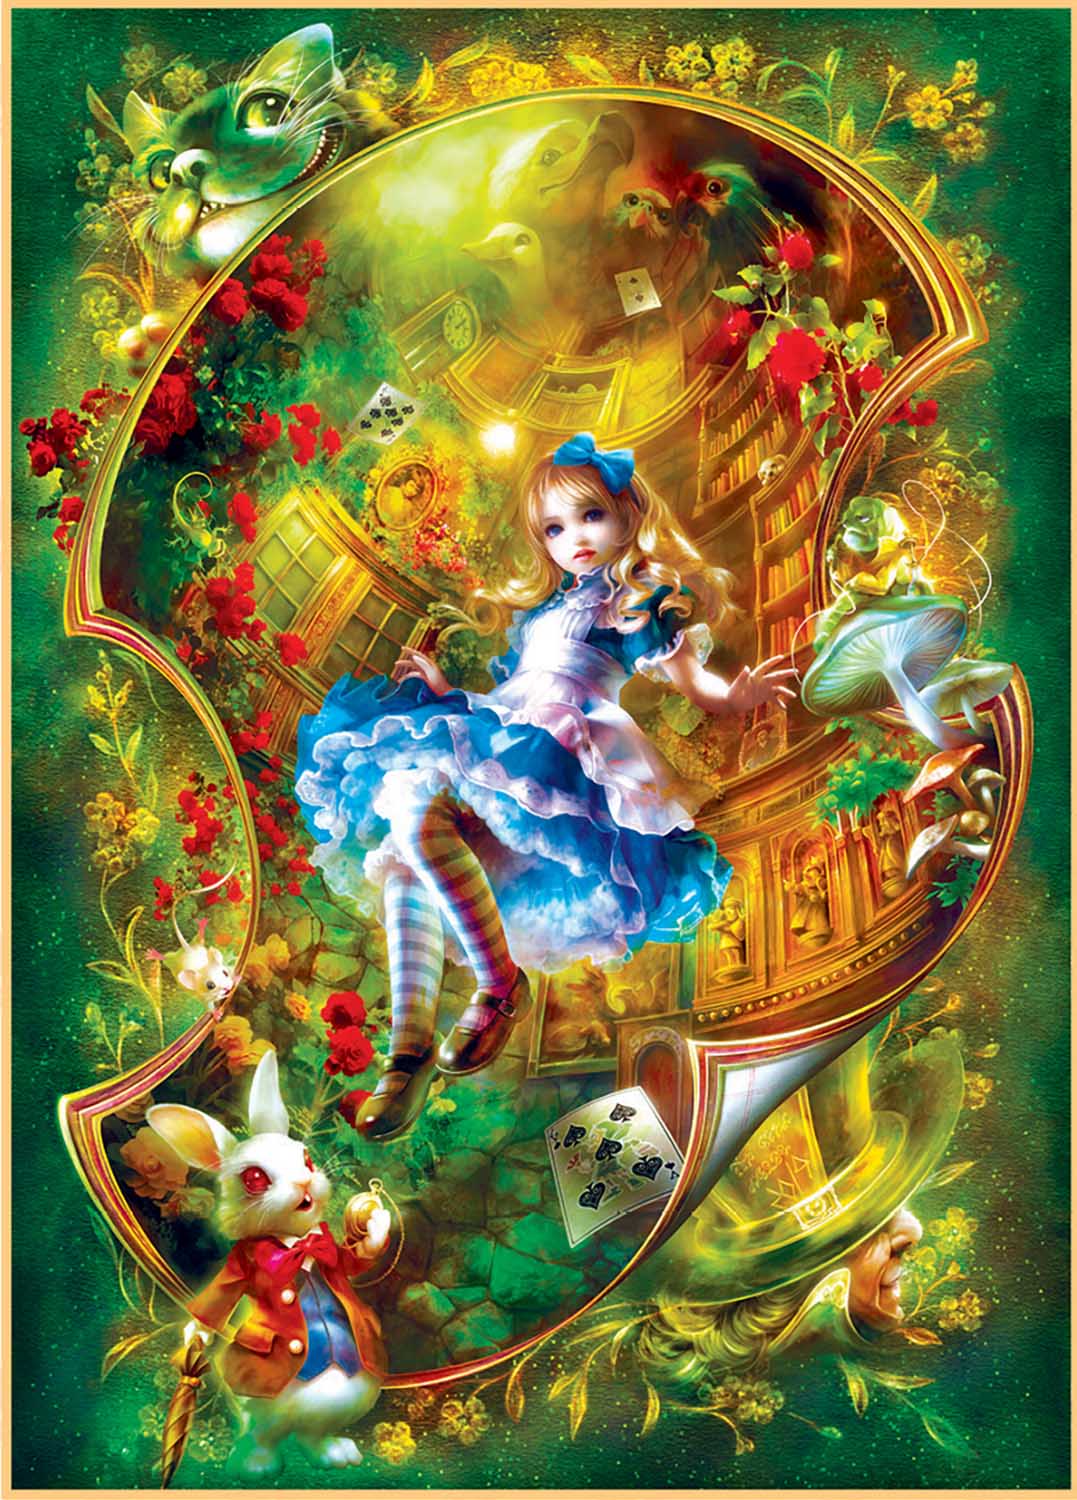 1000 Piece Jigsaw Puzzle Alice Story in the Wonderland Stained Glass 